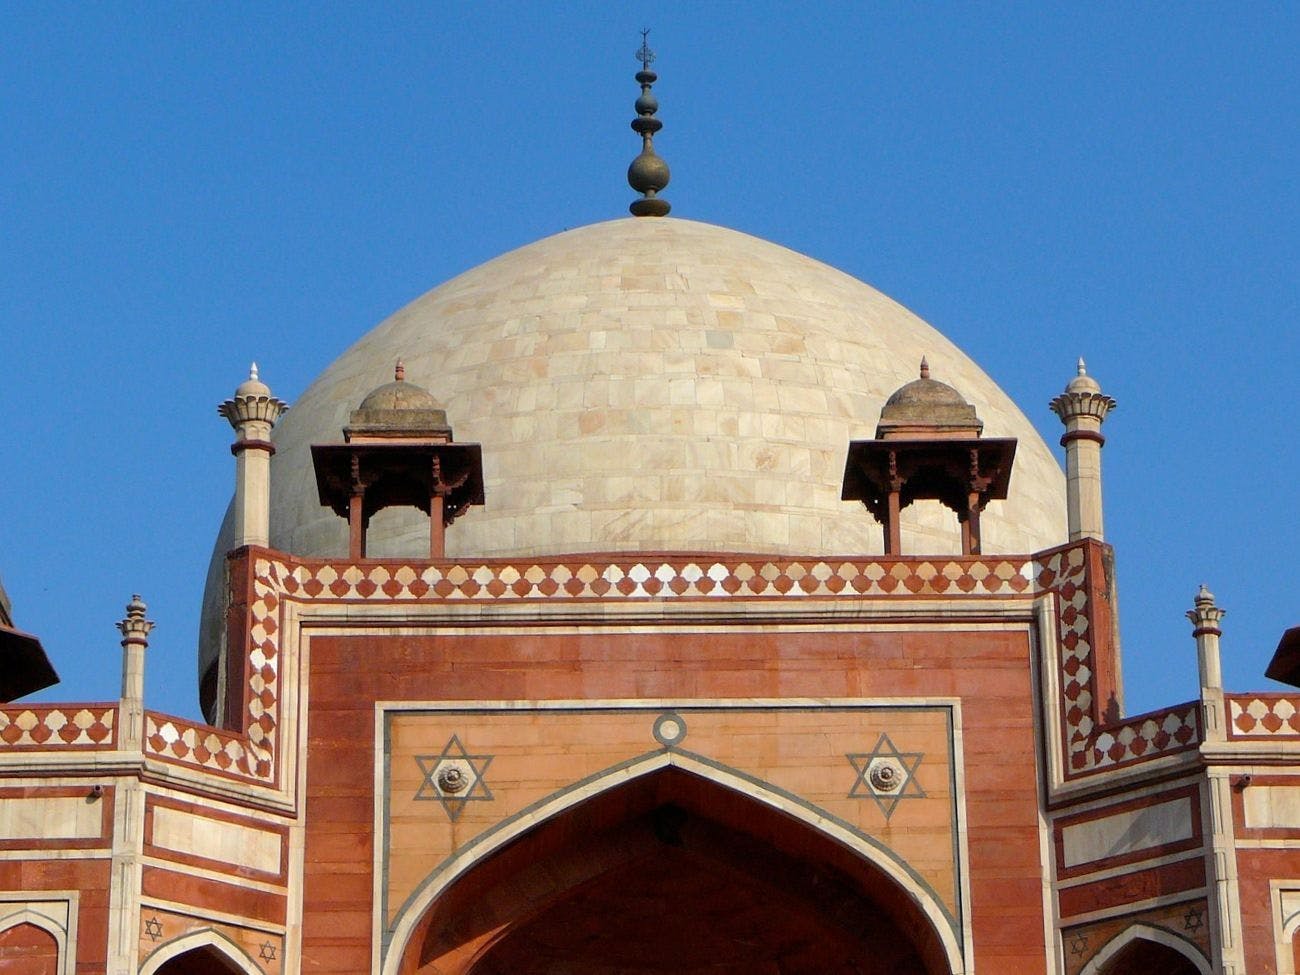 The white marble dome of the tomb with chhatris